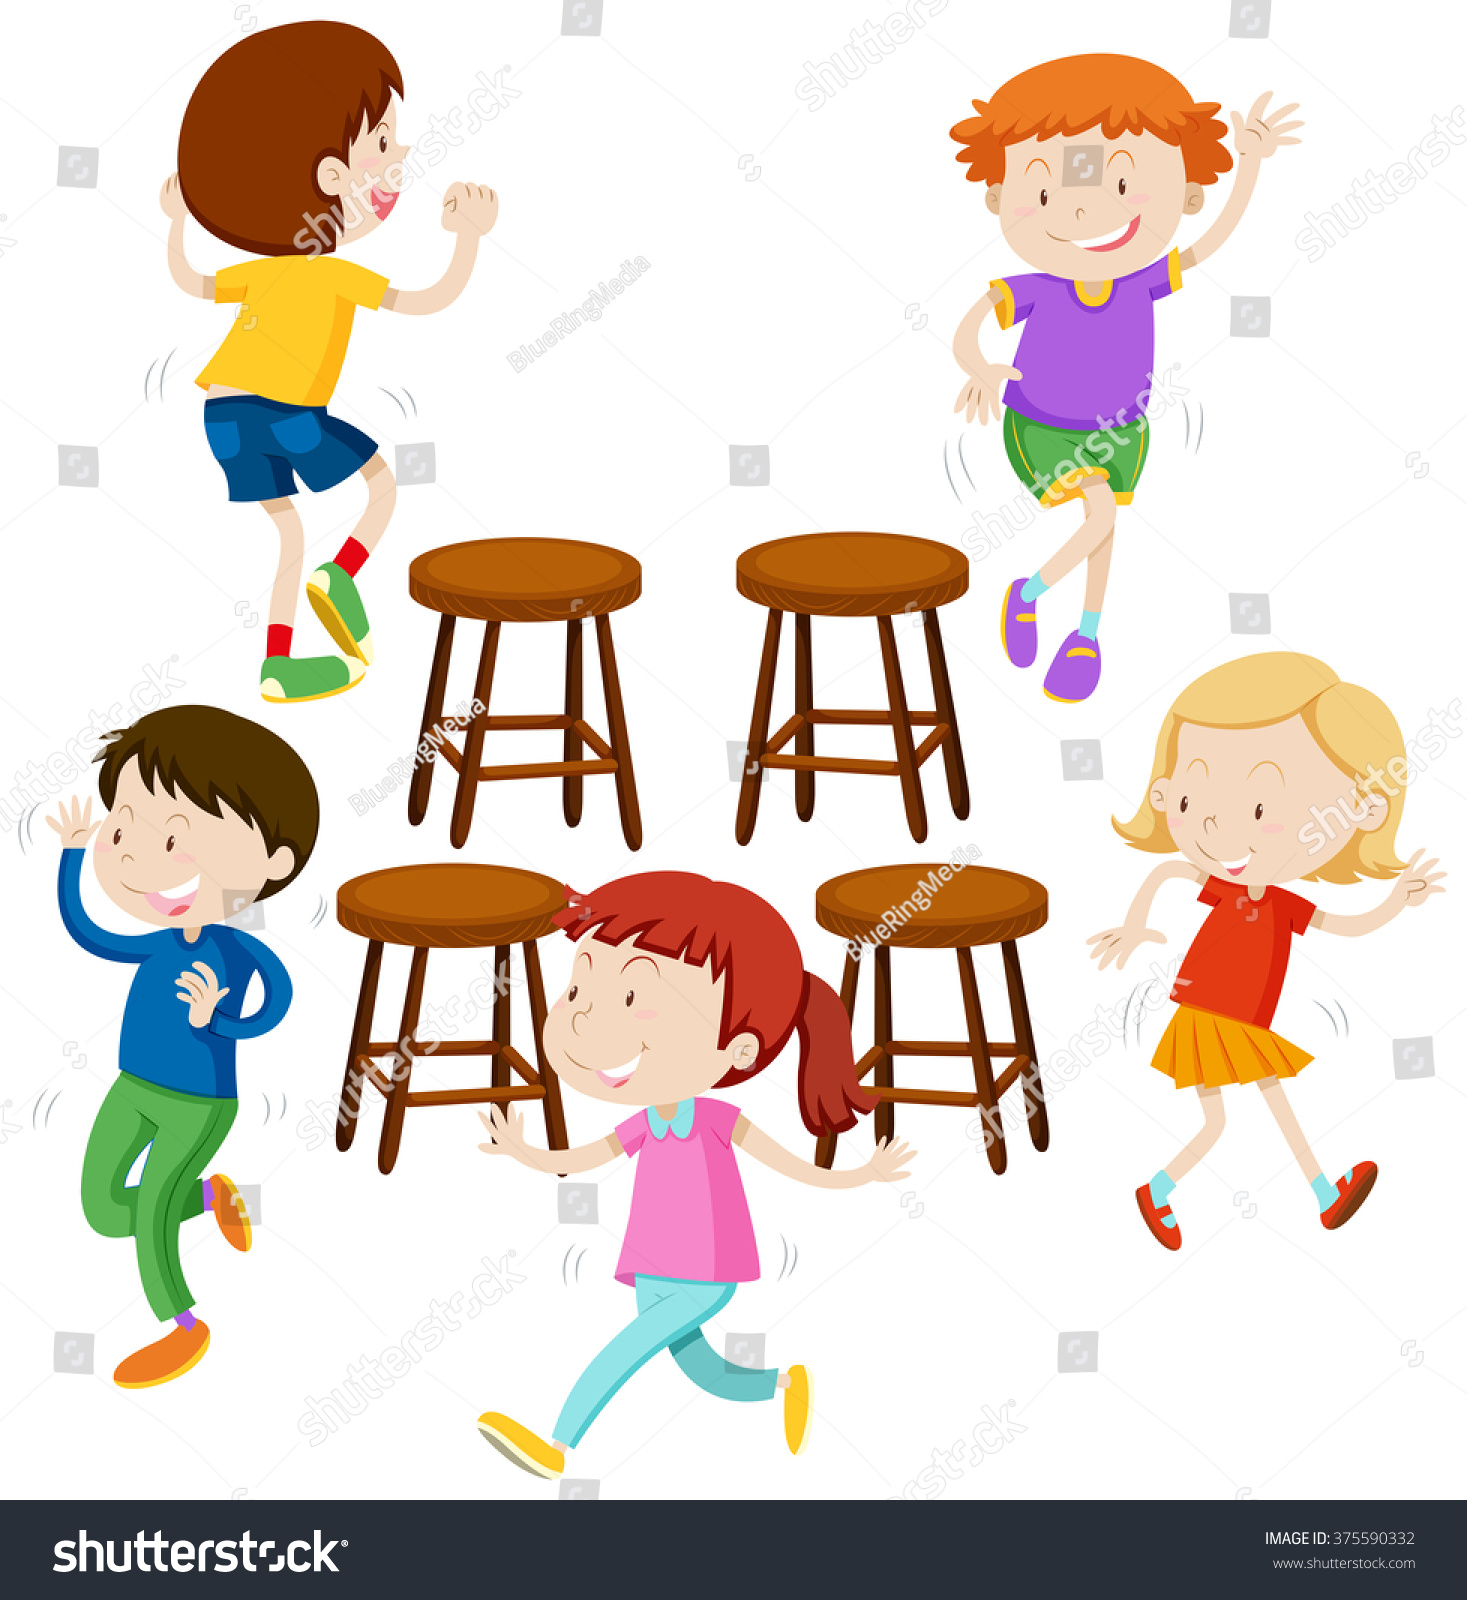 Clipart musical chairs